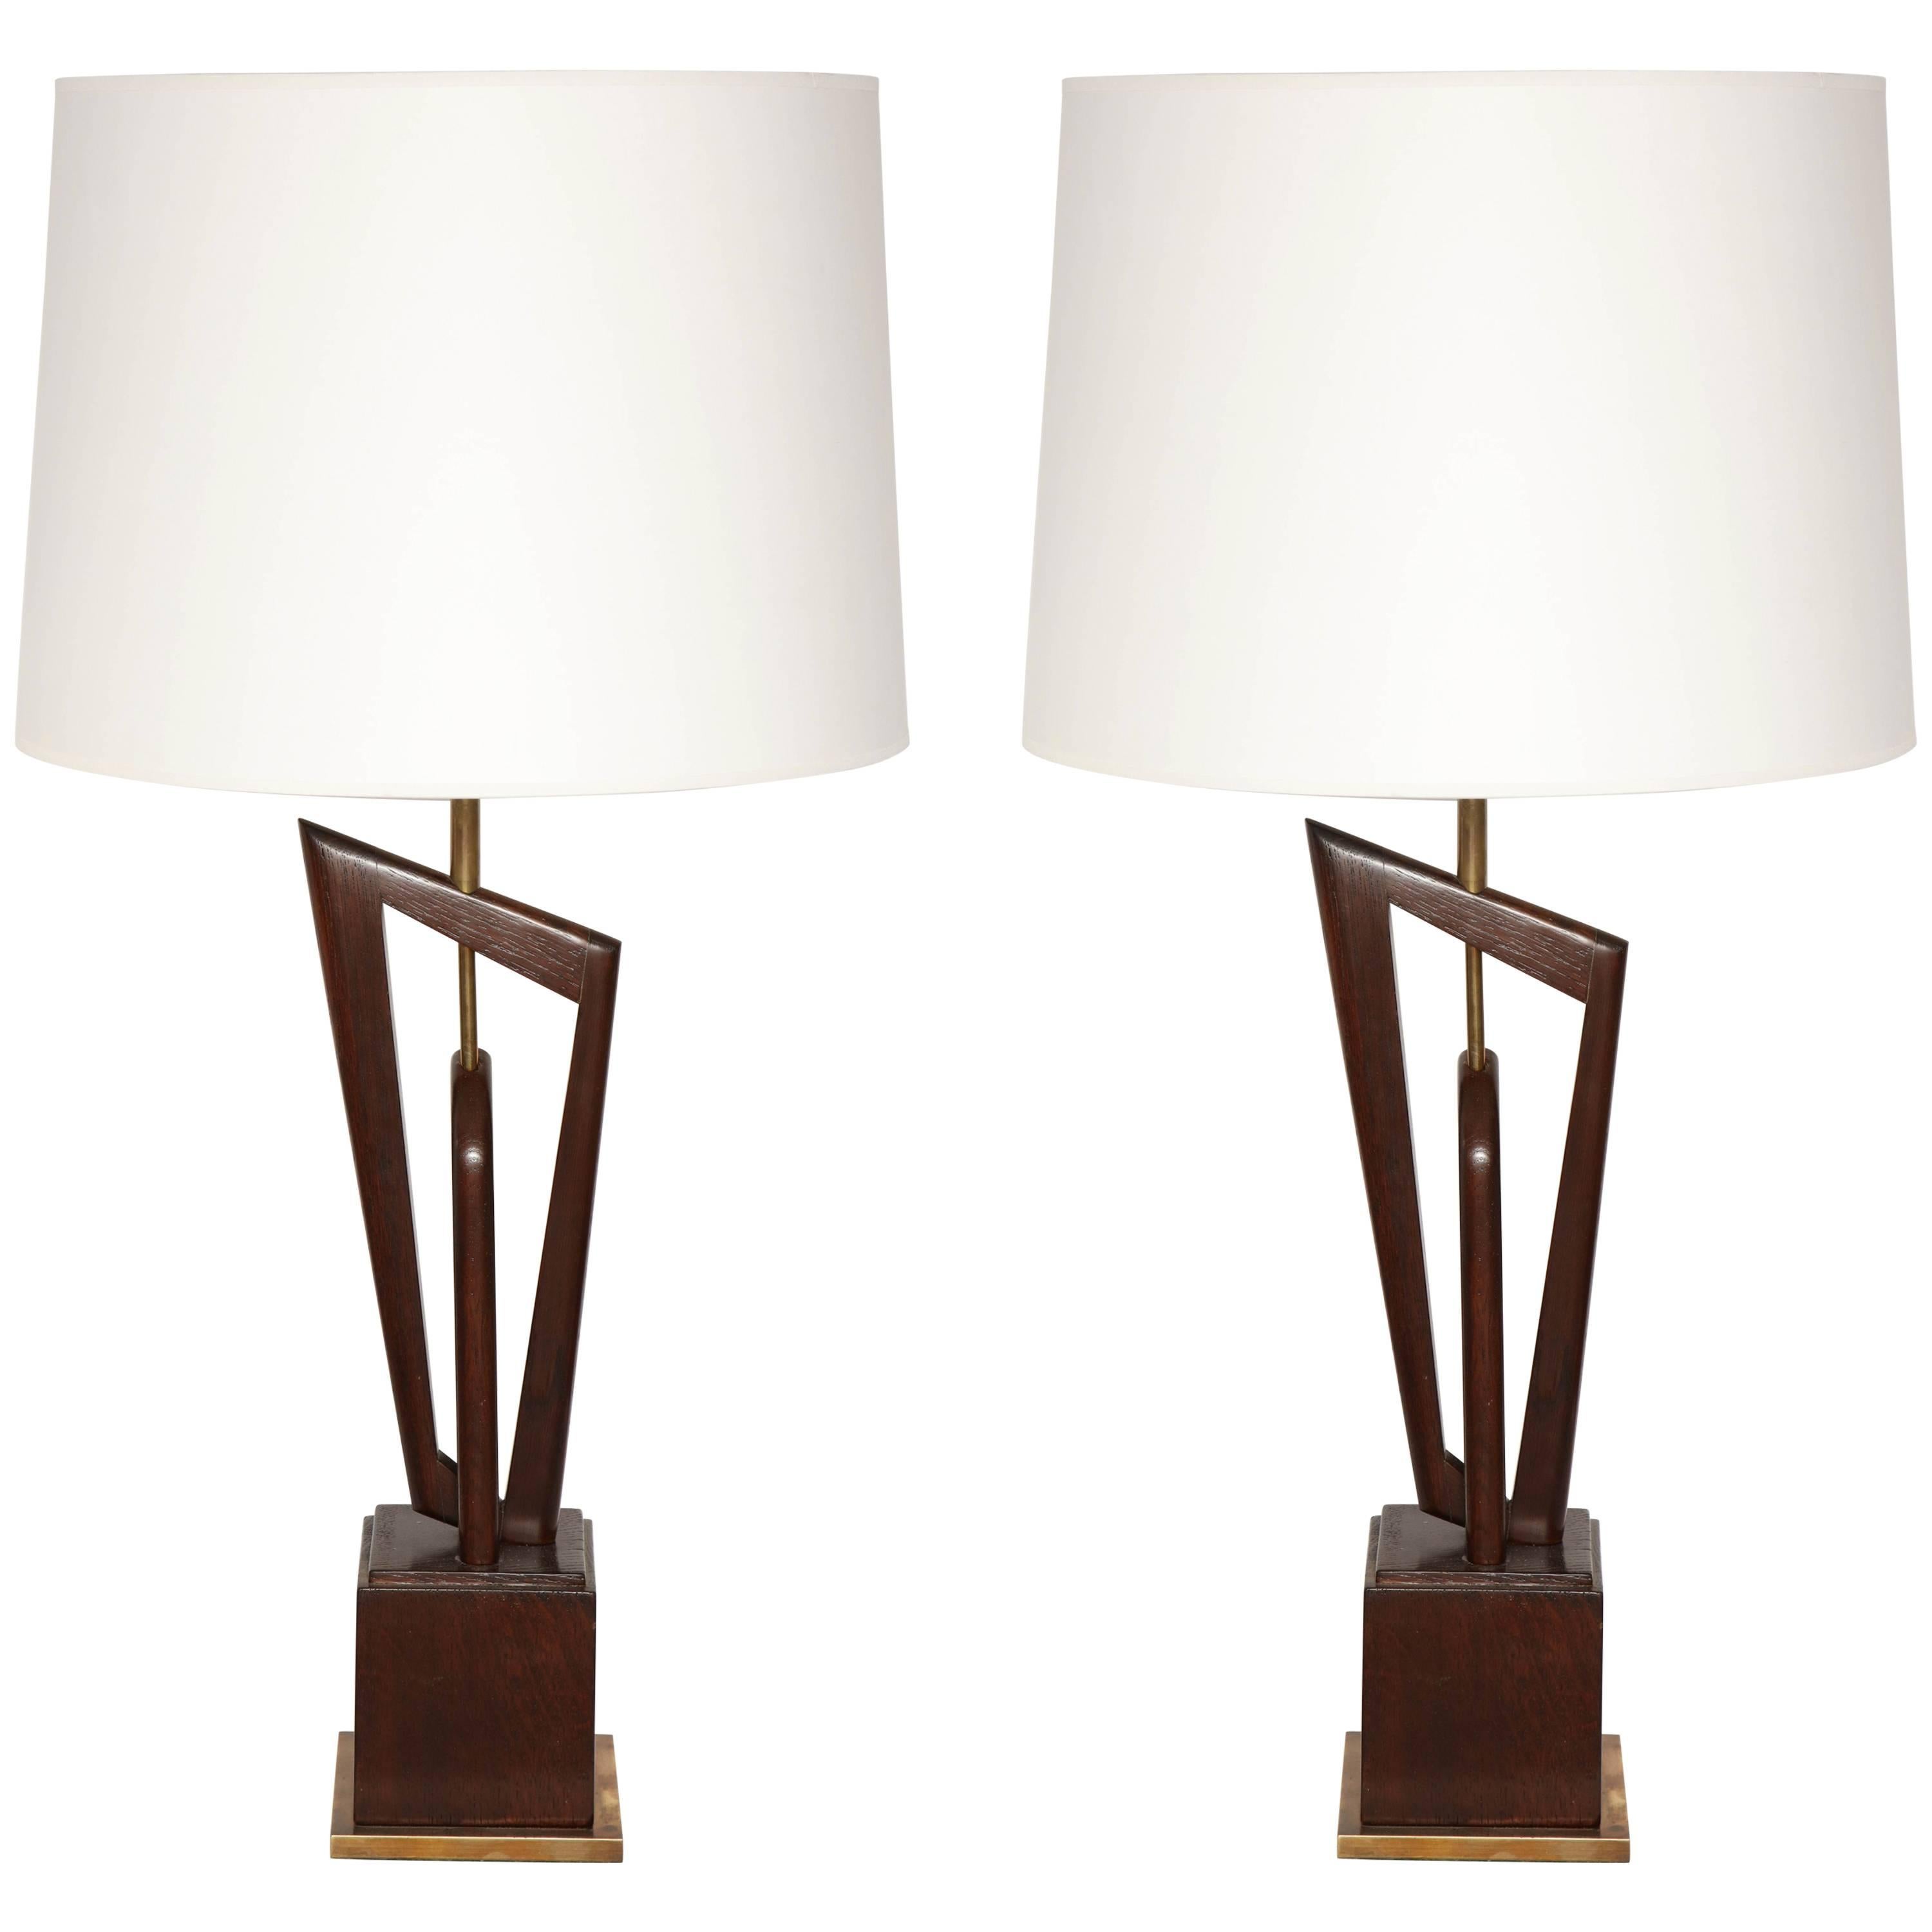 Pair of Mid-Century, 1950s Sculptural Wood and Brass Table Lamps